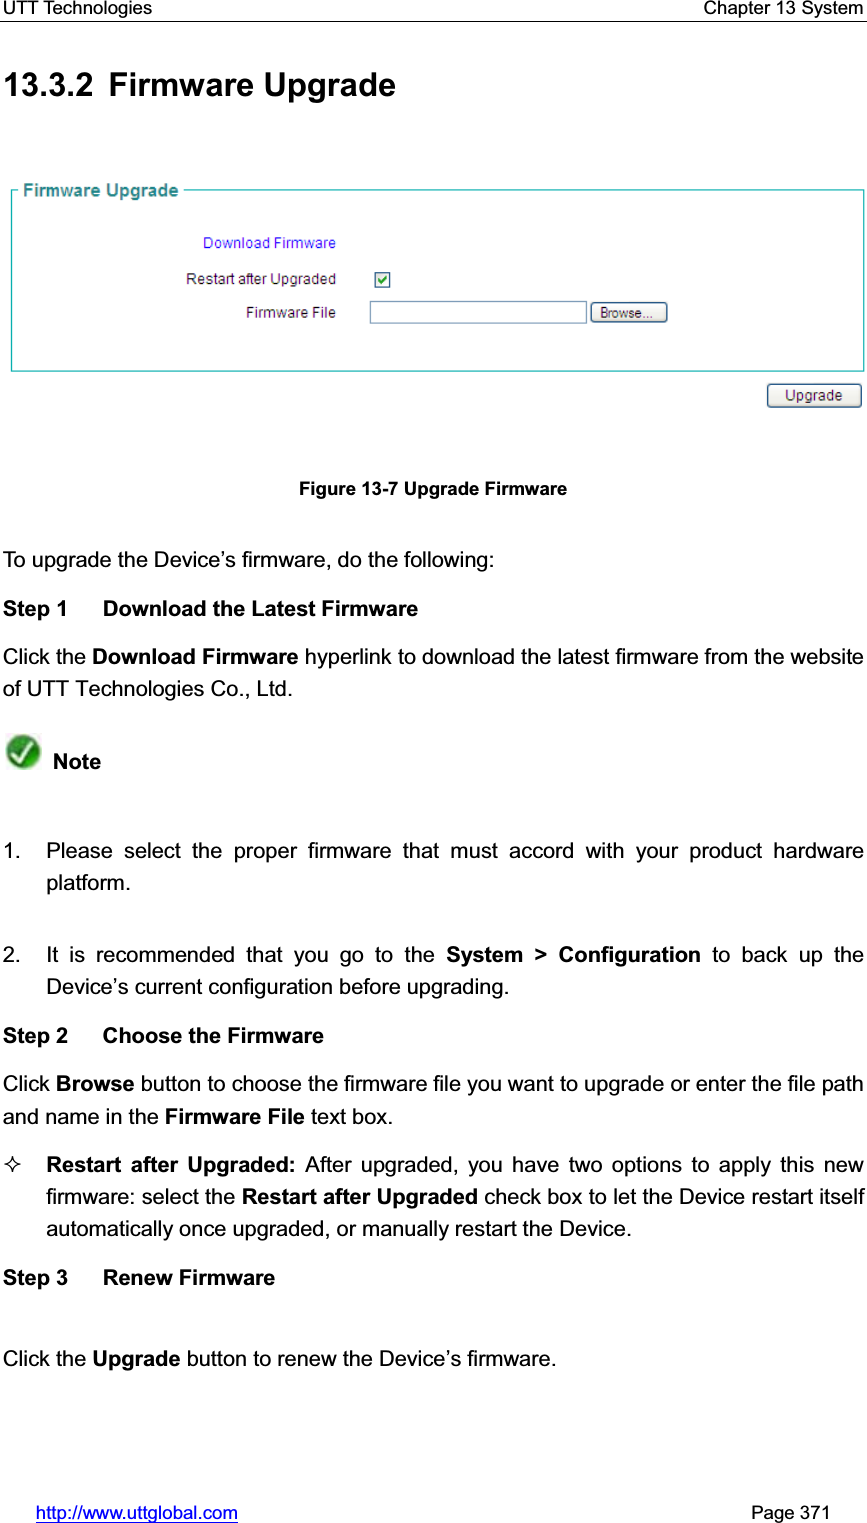 UTT Technologies    Chapter 13 System   http://www.uttglobal.com                                                       Page 371 13.3.2 Firmware Upgrade Figure 13-7 Upgrade Firmware To upgrade the Device¶s firmware, do the following: Step 1  Download the Latest Firmware Click the Download Firmware hyperlink to download the latest firmware from the website of UTT Technologies Co., Ltd.Note1.  Please select the proper firmware that must accord with your product hardware platform. 2.  It is recommended that you go to the System &gt; Configuration to back up the Device¶s current configuration before upgrading. Step 2  Choose the Firmware Click Browse button to choose the firmware file you want to upgrade or enter the file path and name in the Firmware File text box. Restart after Upgraded: After upgraded, you have two options to apply this new firmware: select the Restart after Upgraded check box to let the Device restart itself automatically once upgraded, or manually restart the Device. Step 3  Renew Firmware Click the Upgrade button to renew the Device¶s firmware.